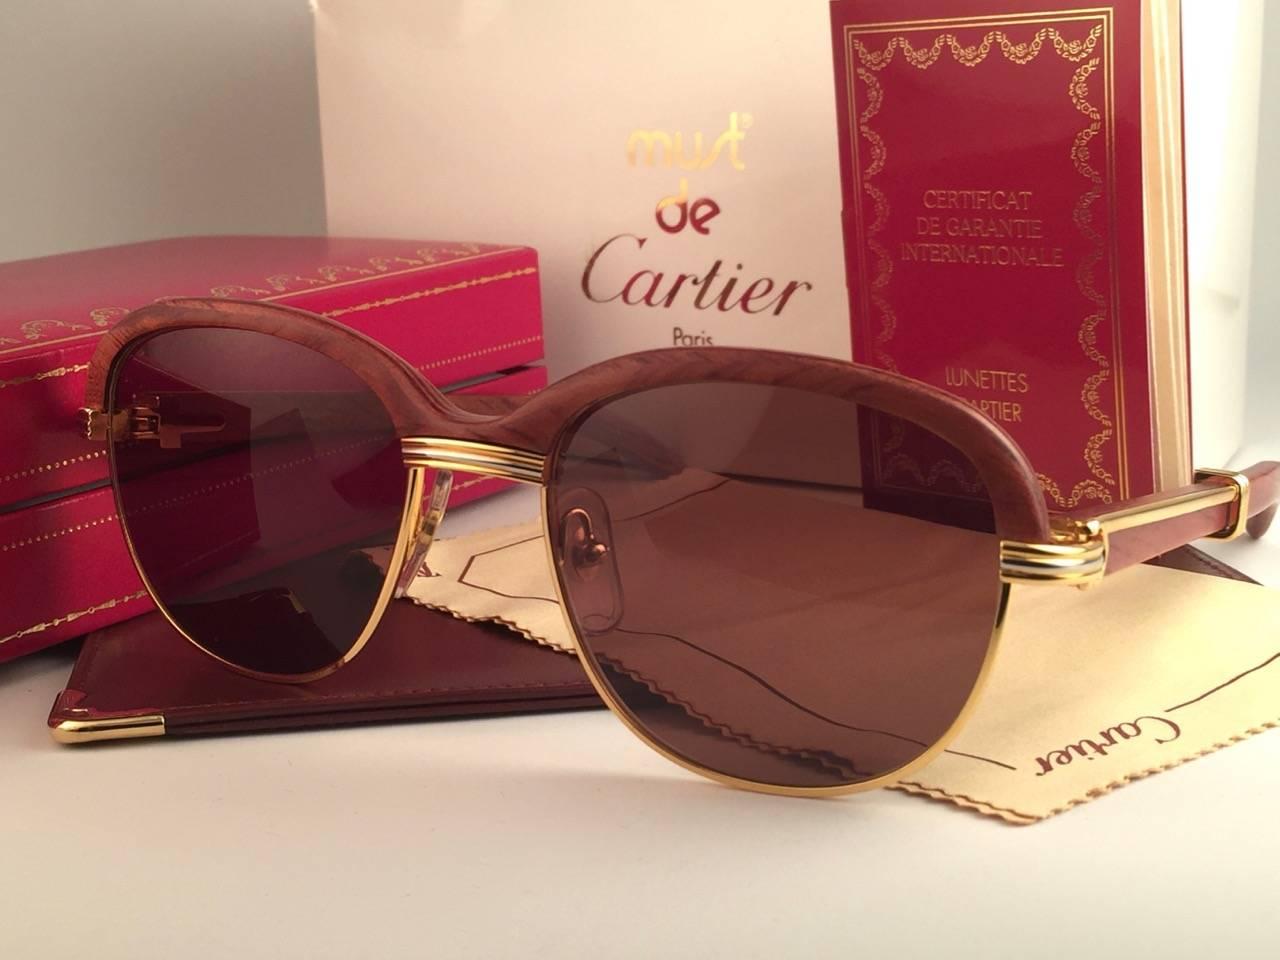 Original New 1990 Cartier Malmaison Palisander hardwood sunglasses with honey brown(uv protection) lenses.  Front and sides in yellow and white gold and has the famous wooden front. Temples are also Palisander combined with gold.  Amazing